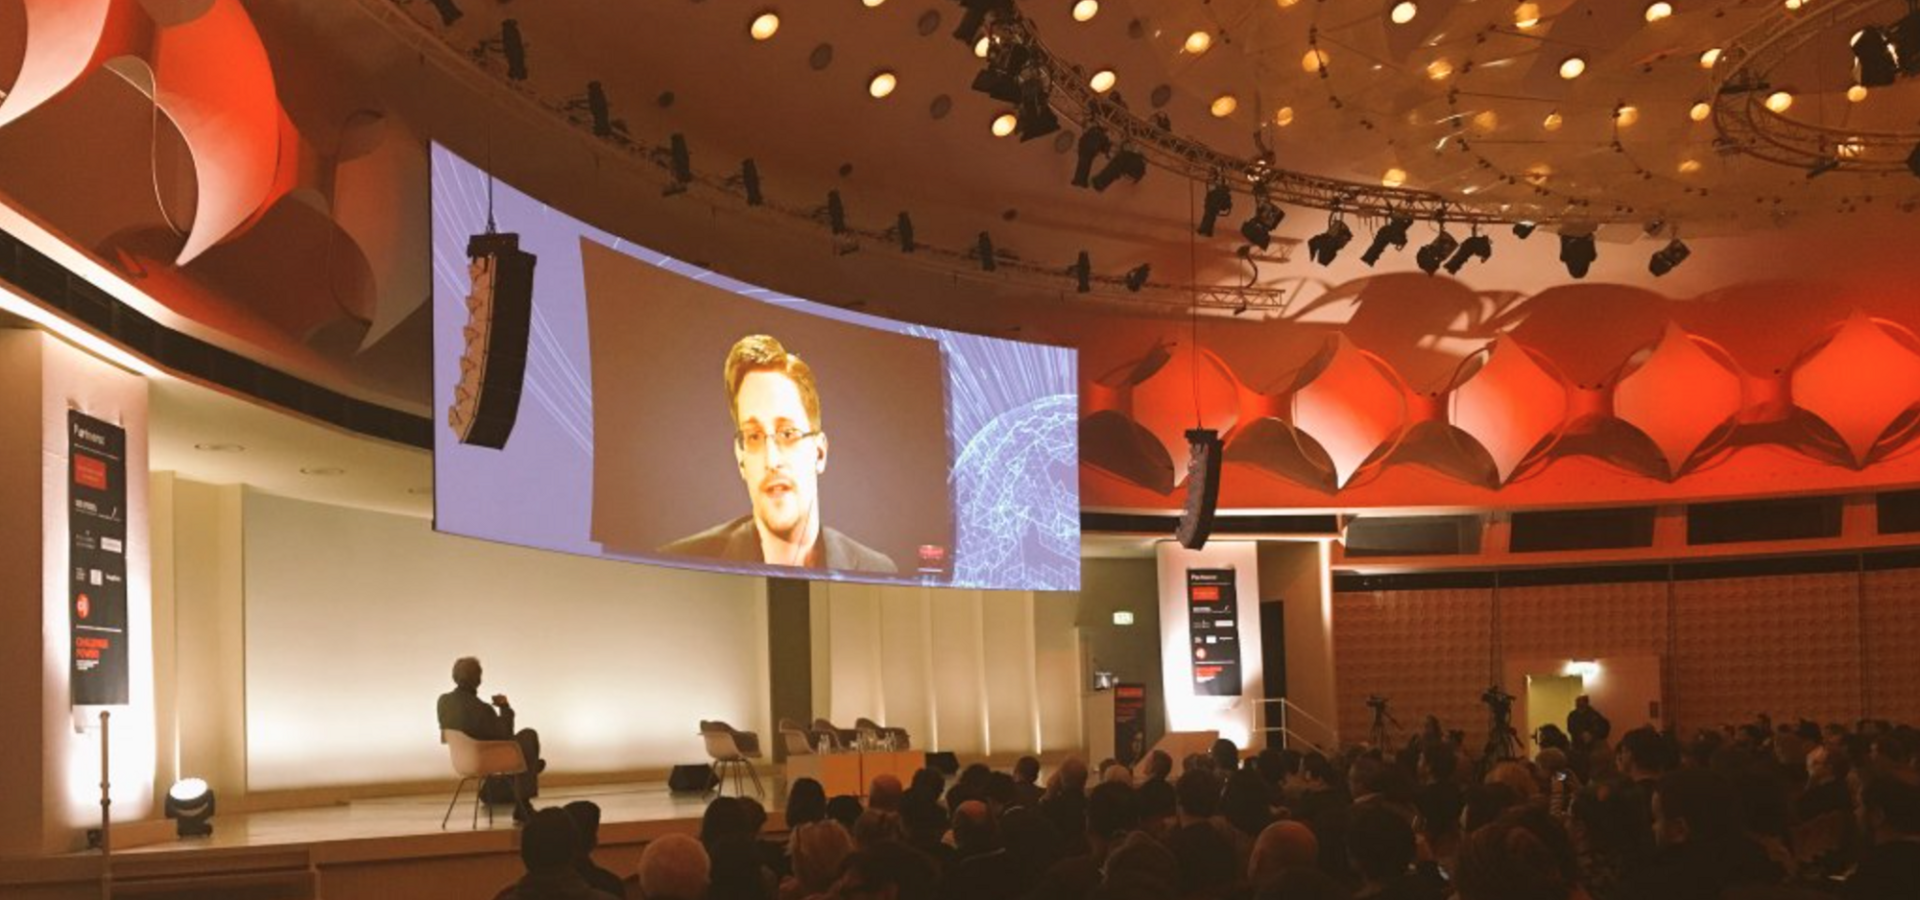 Edward Snowden addressing an audience live in Berlin via video link on Saturday evening.